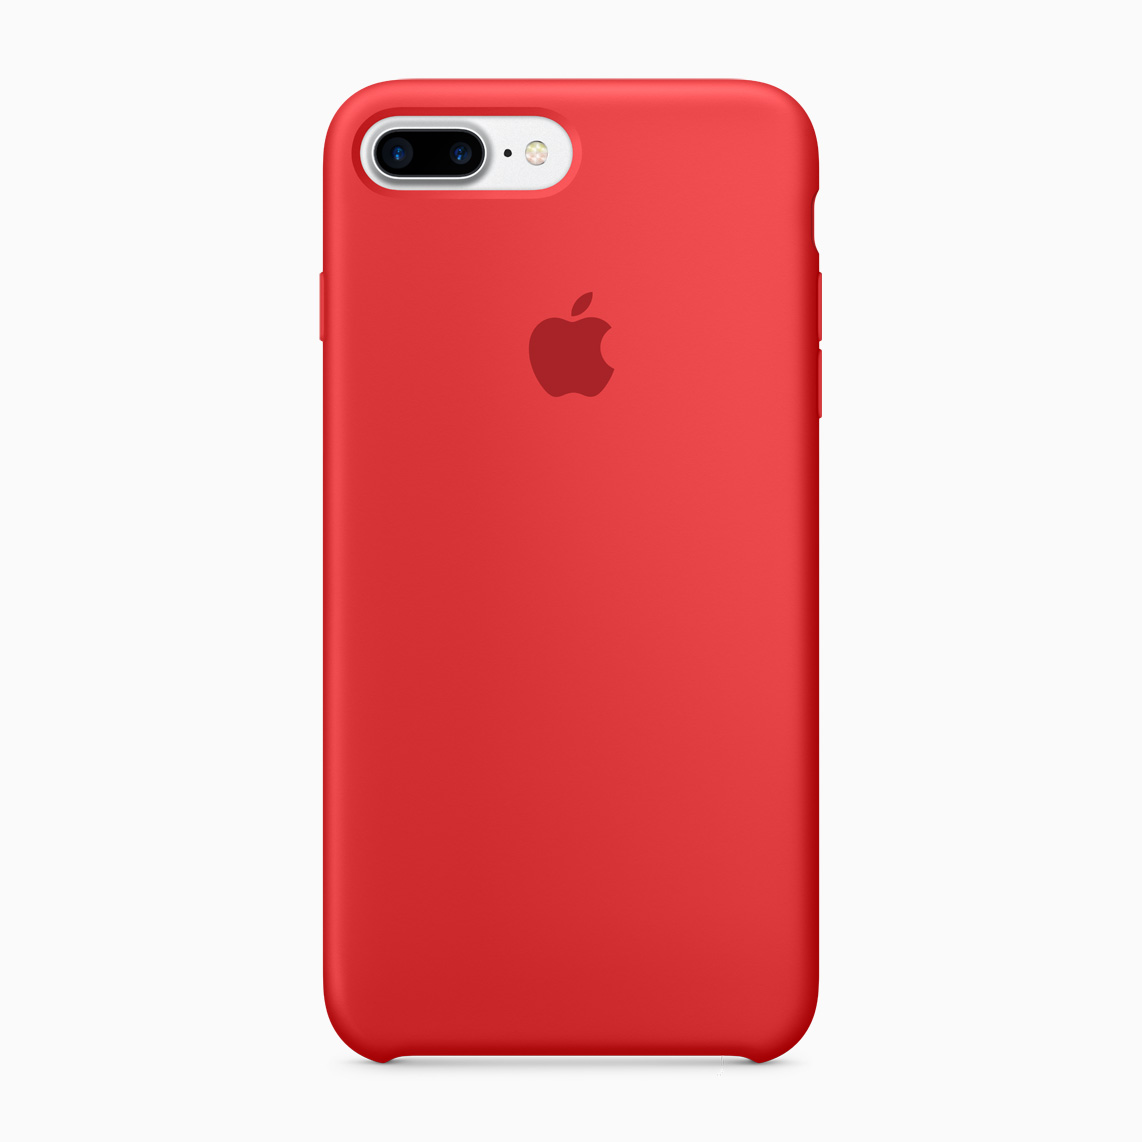 Apple Unveils Four New (RED) Products, Up to $1 Million Donation for World AIDS Day